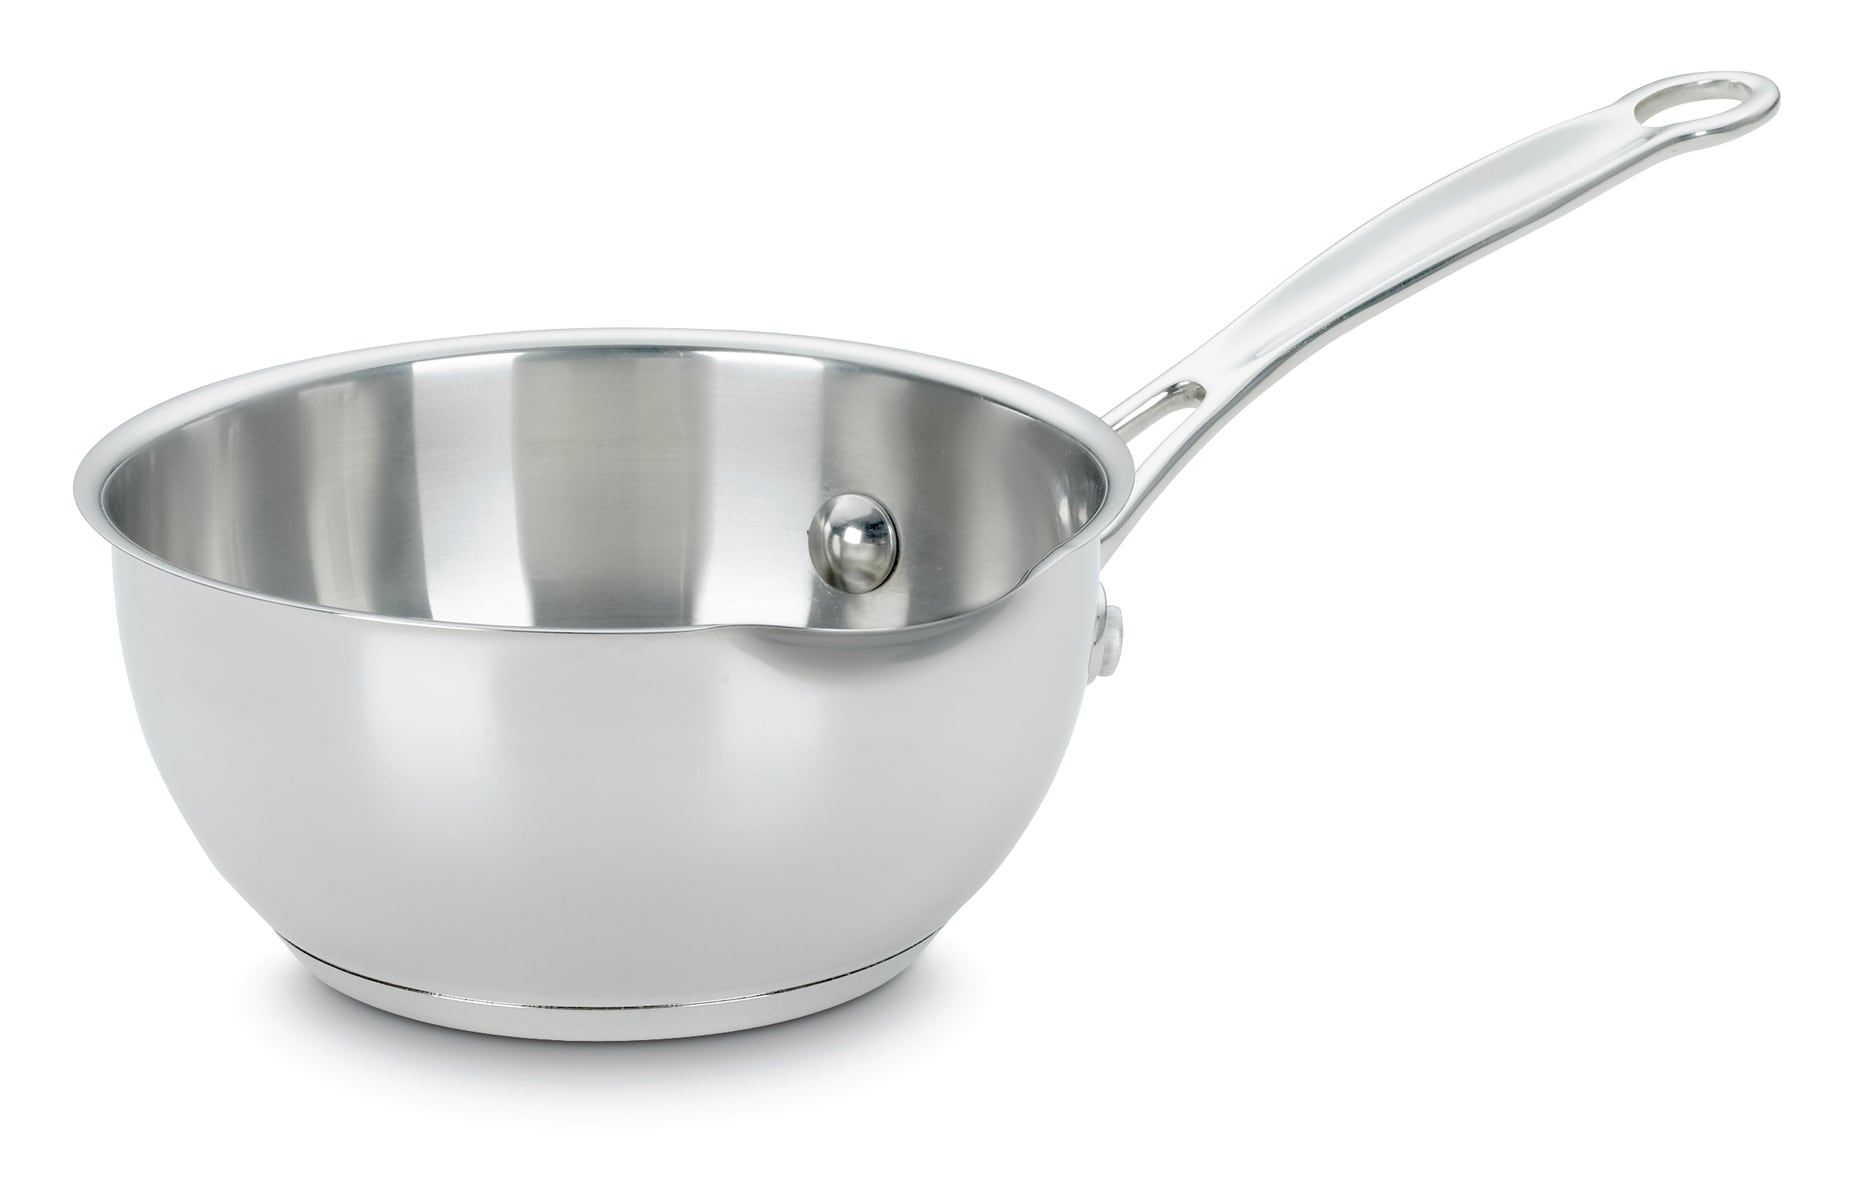 Cuisinart MultiClad Pro Stainless 10-Inch Open Skillet,Stainless